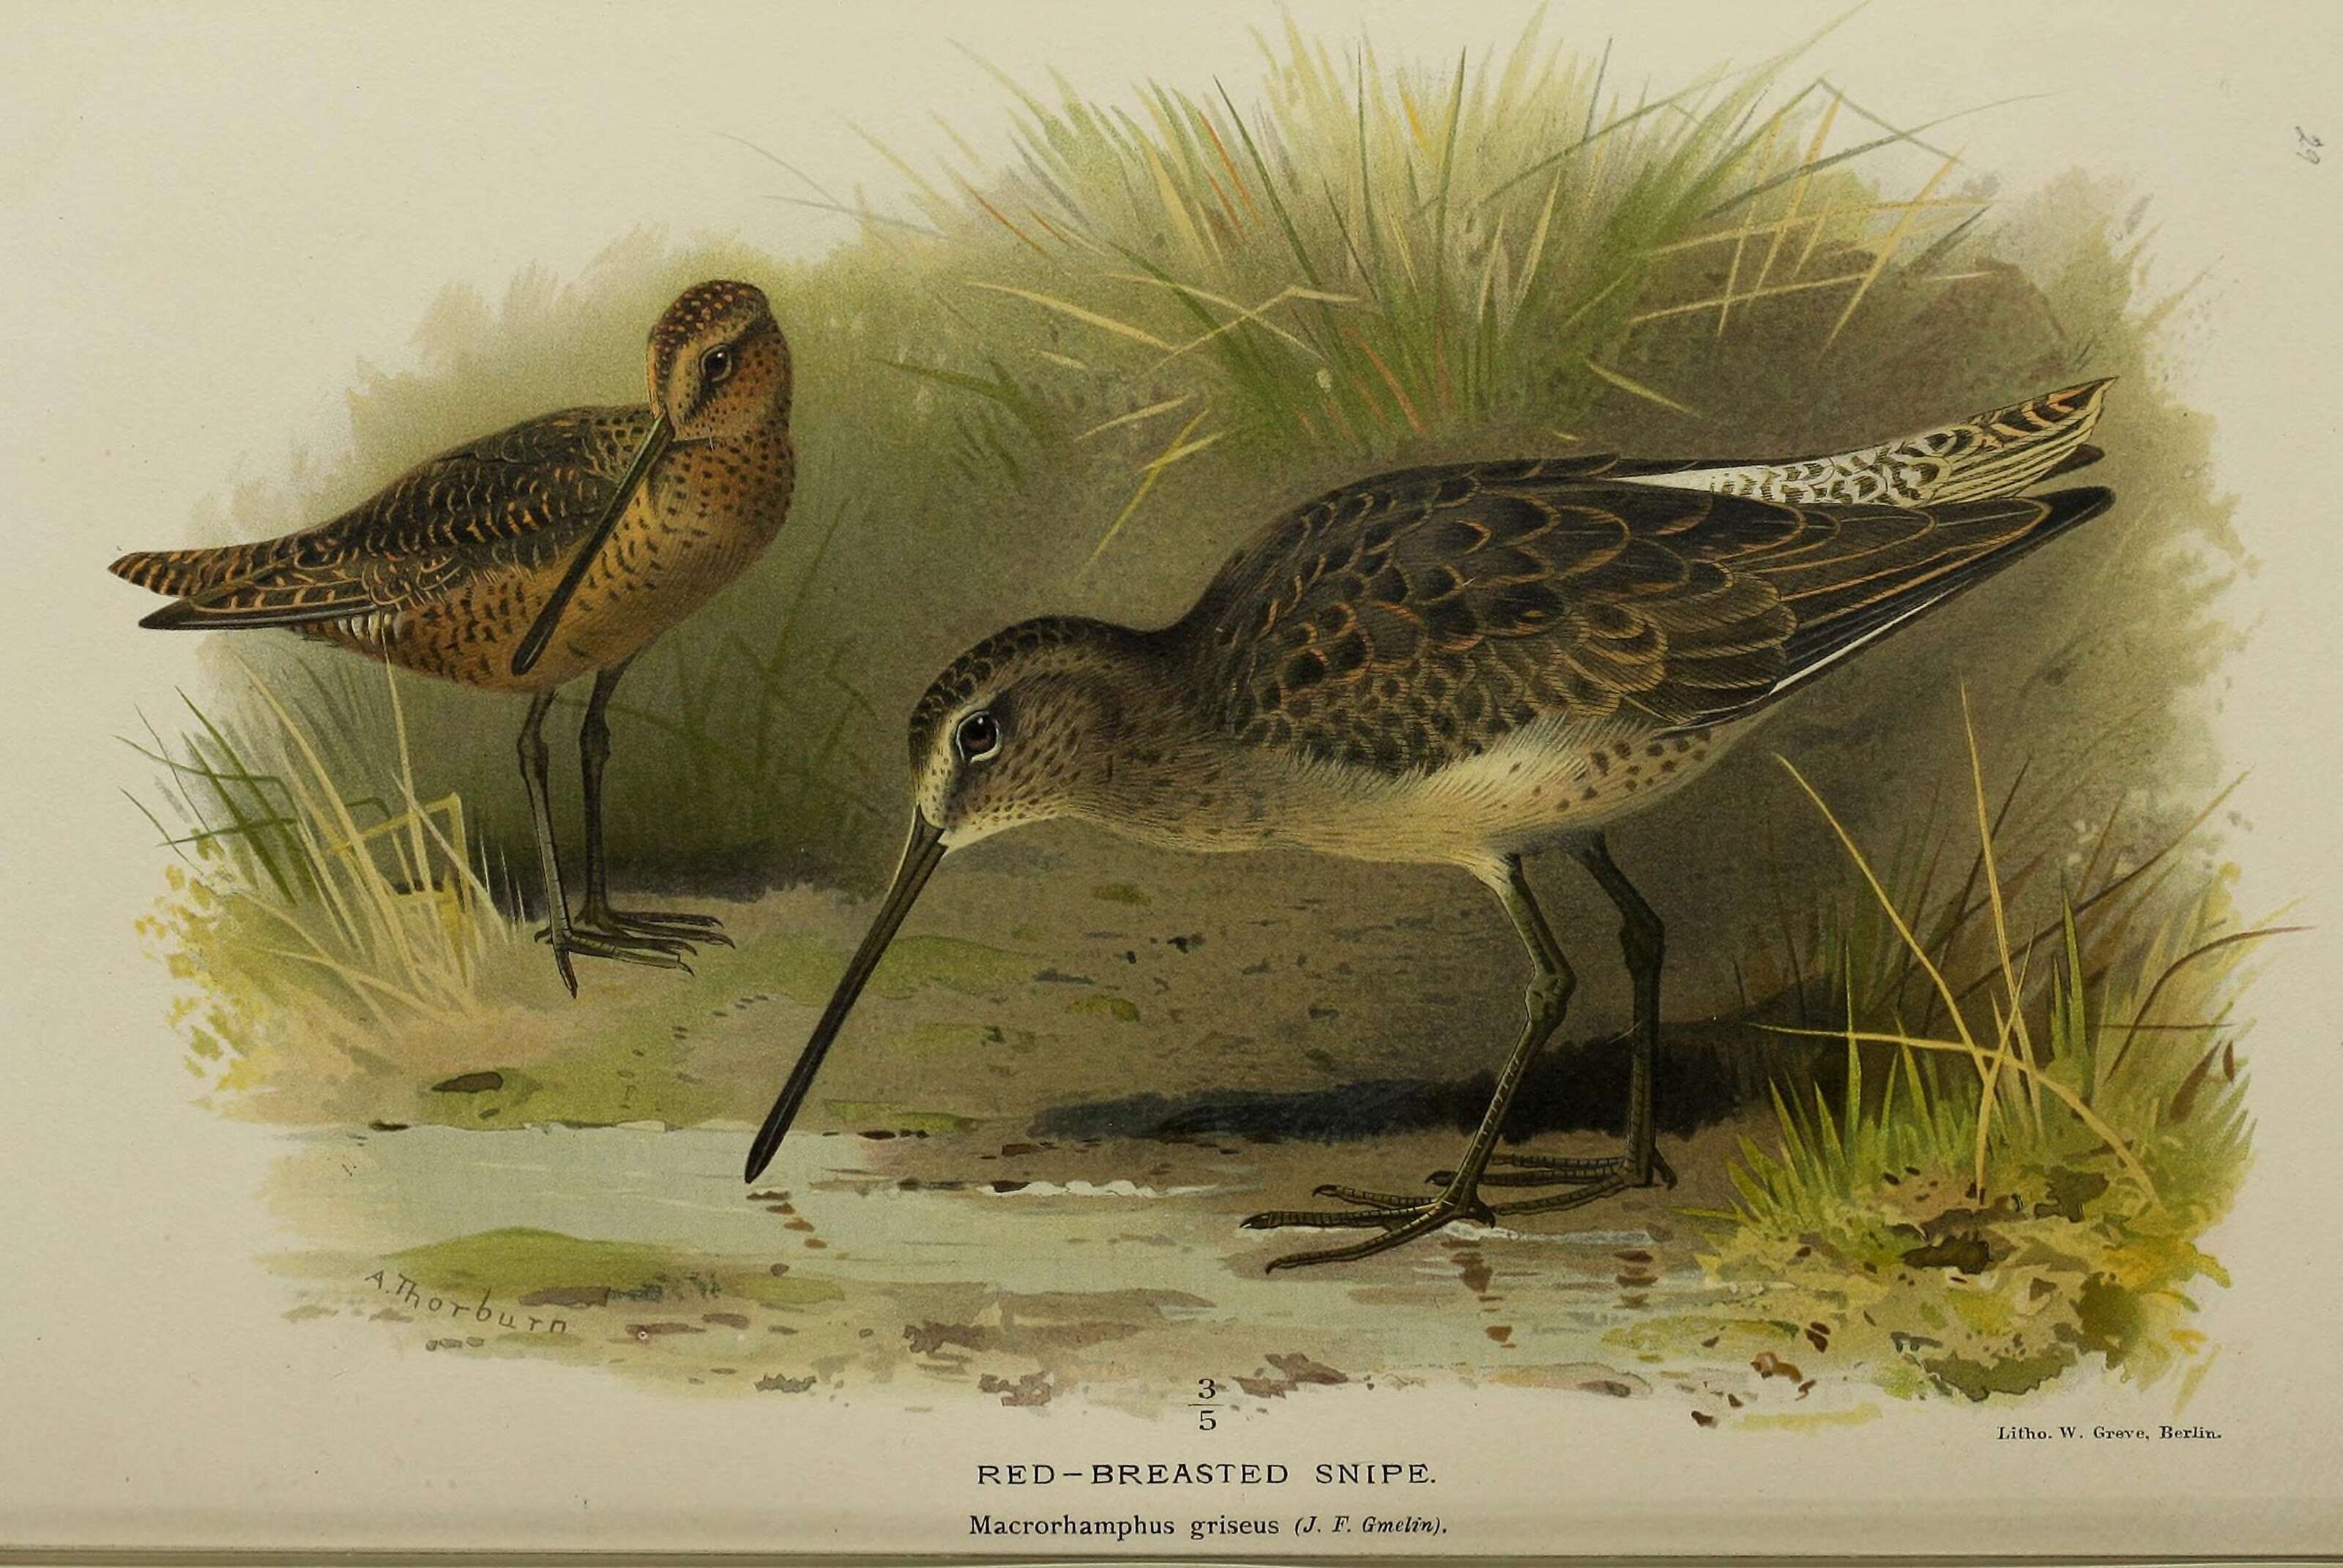 Image of Short-billed Dowitcher